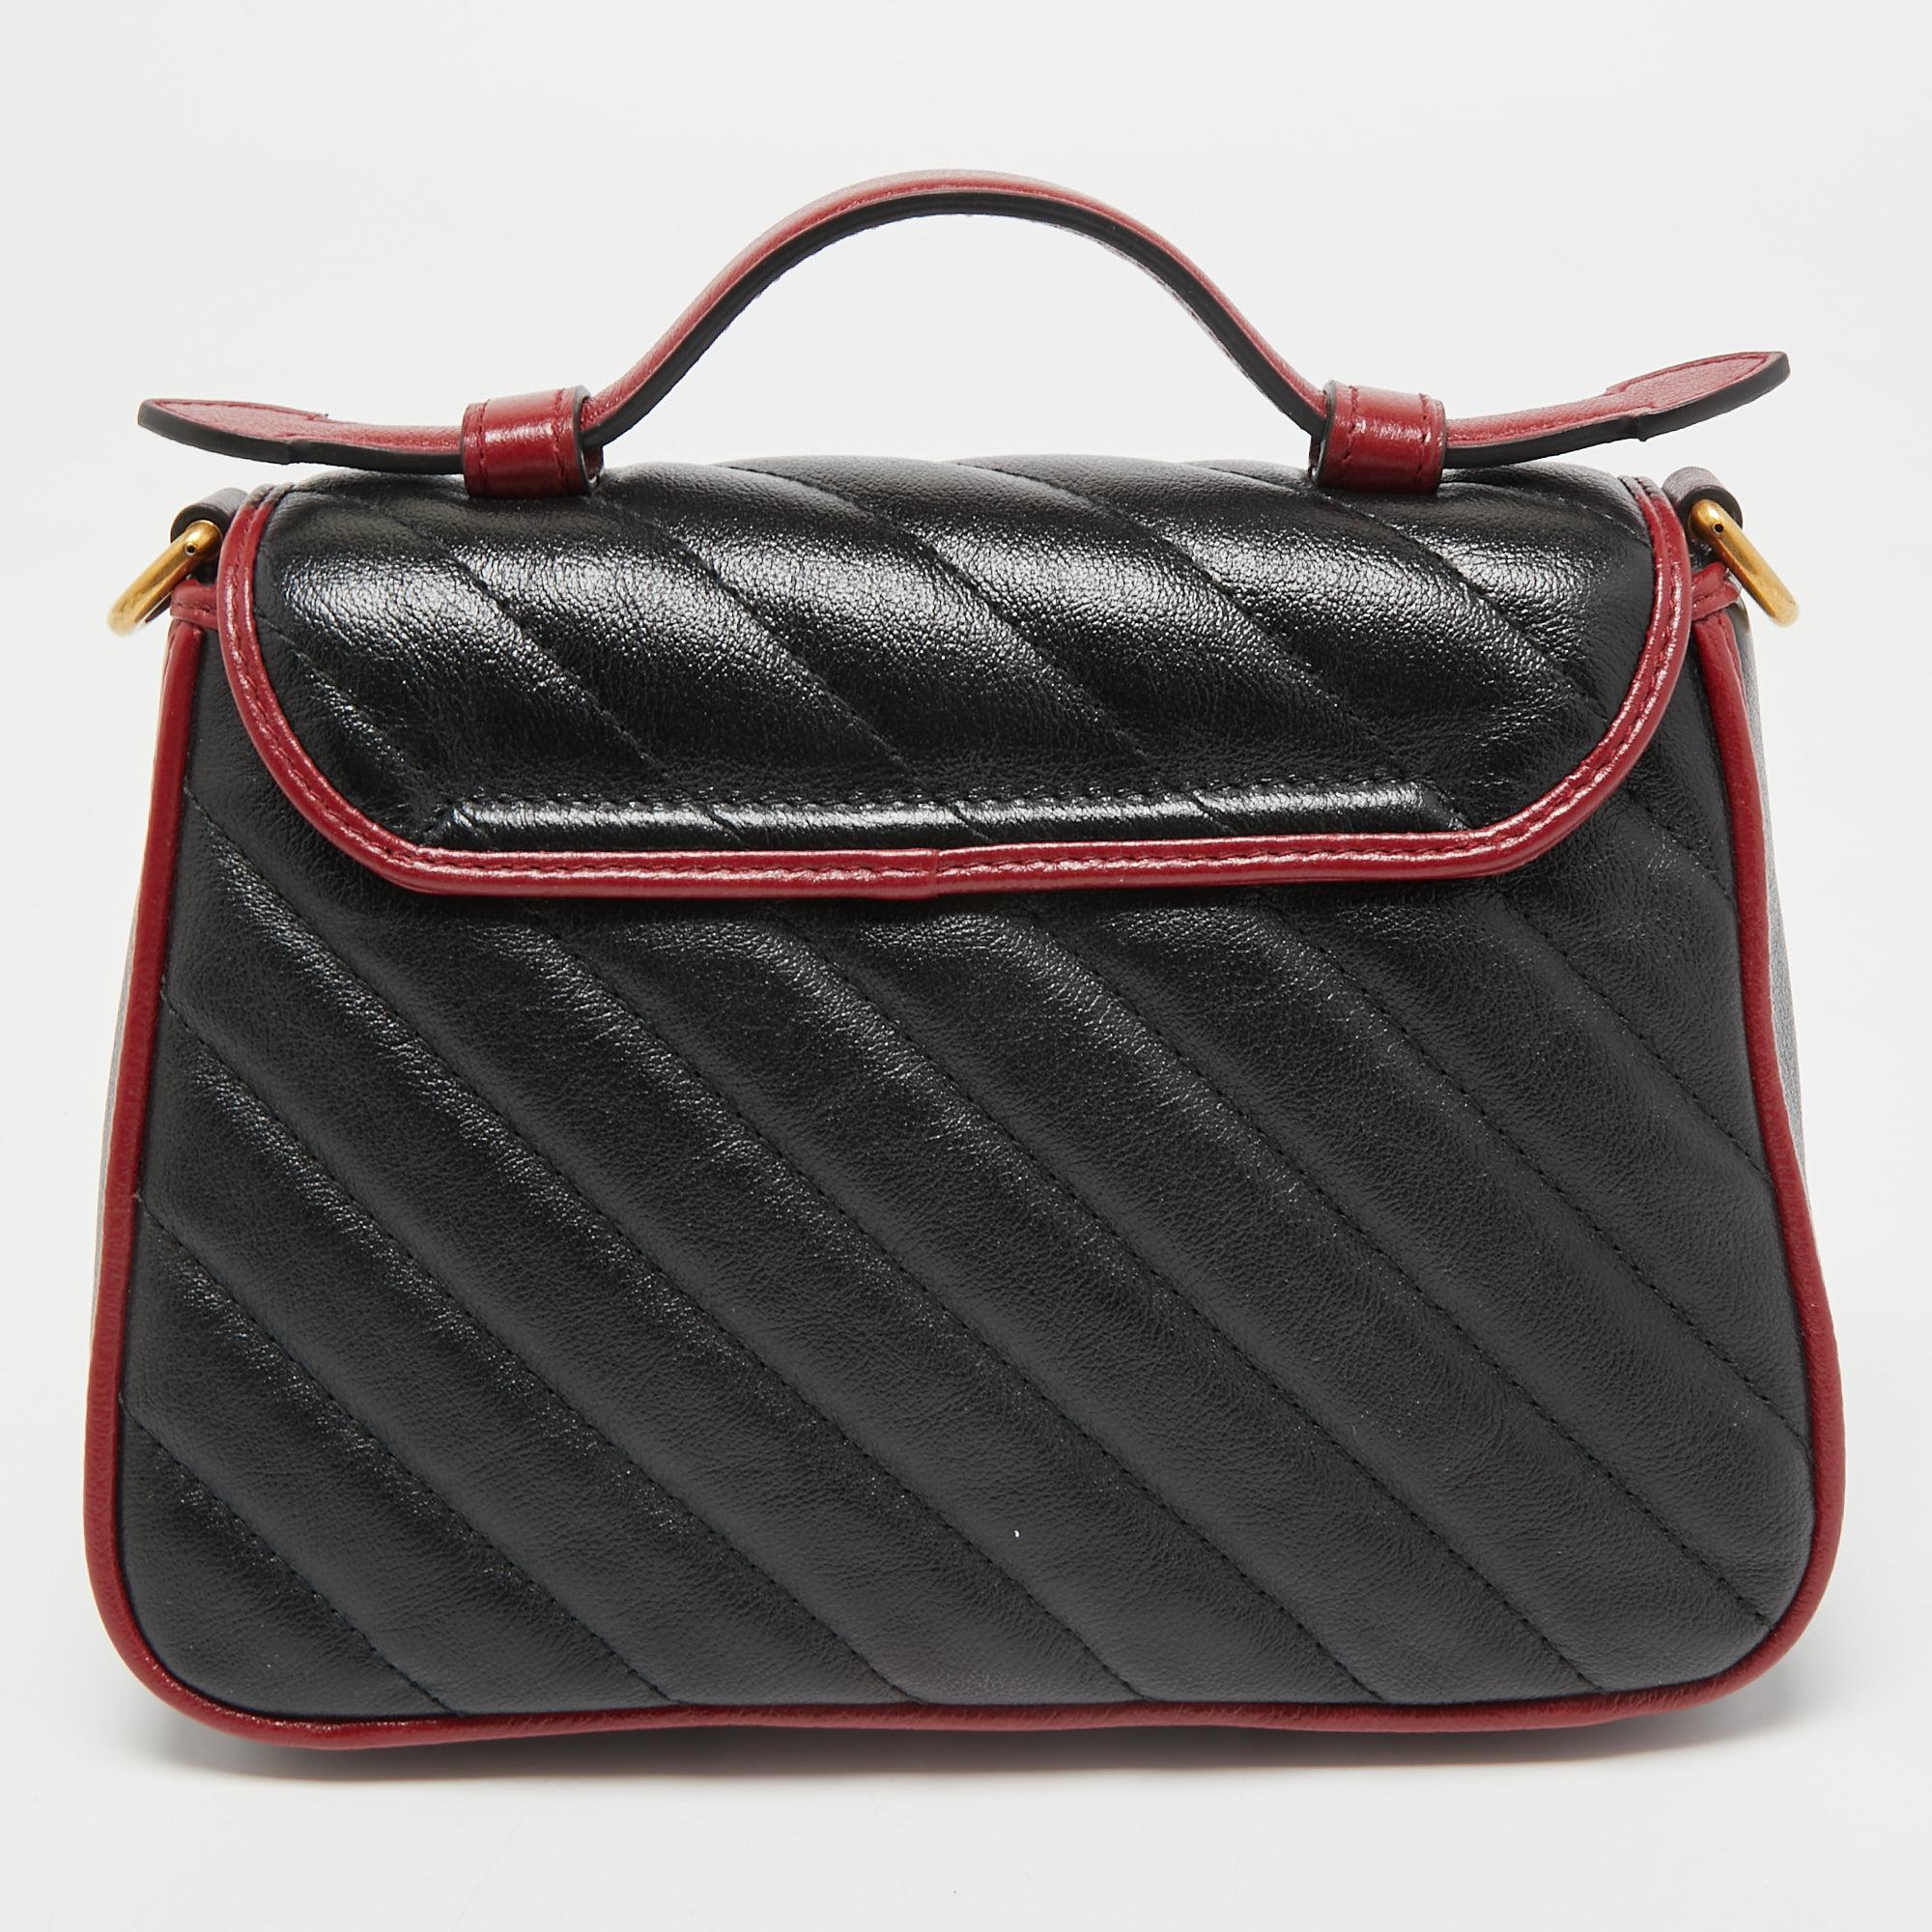 Gucci Black/Red Diagonal Quilt Leather Mini GG Marmont Top Handle Bag 2